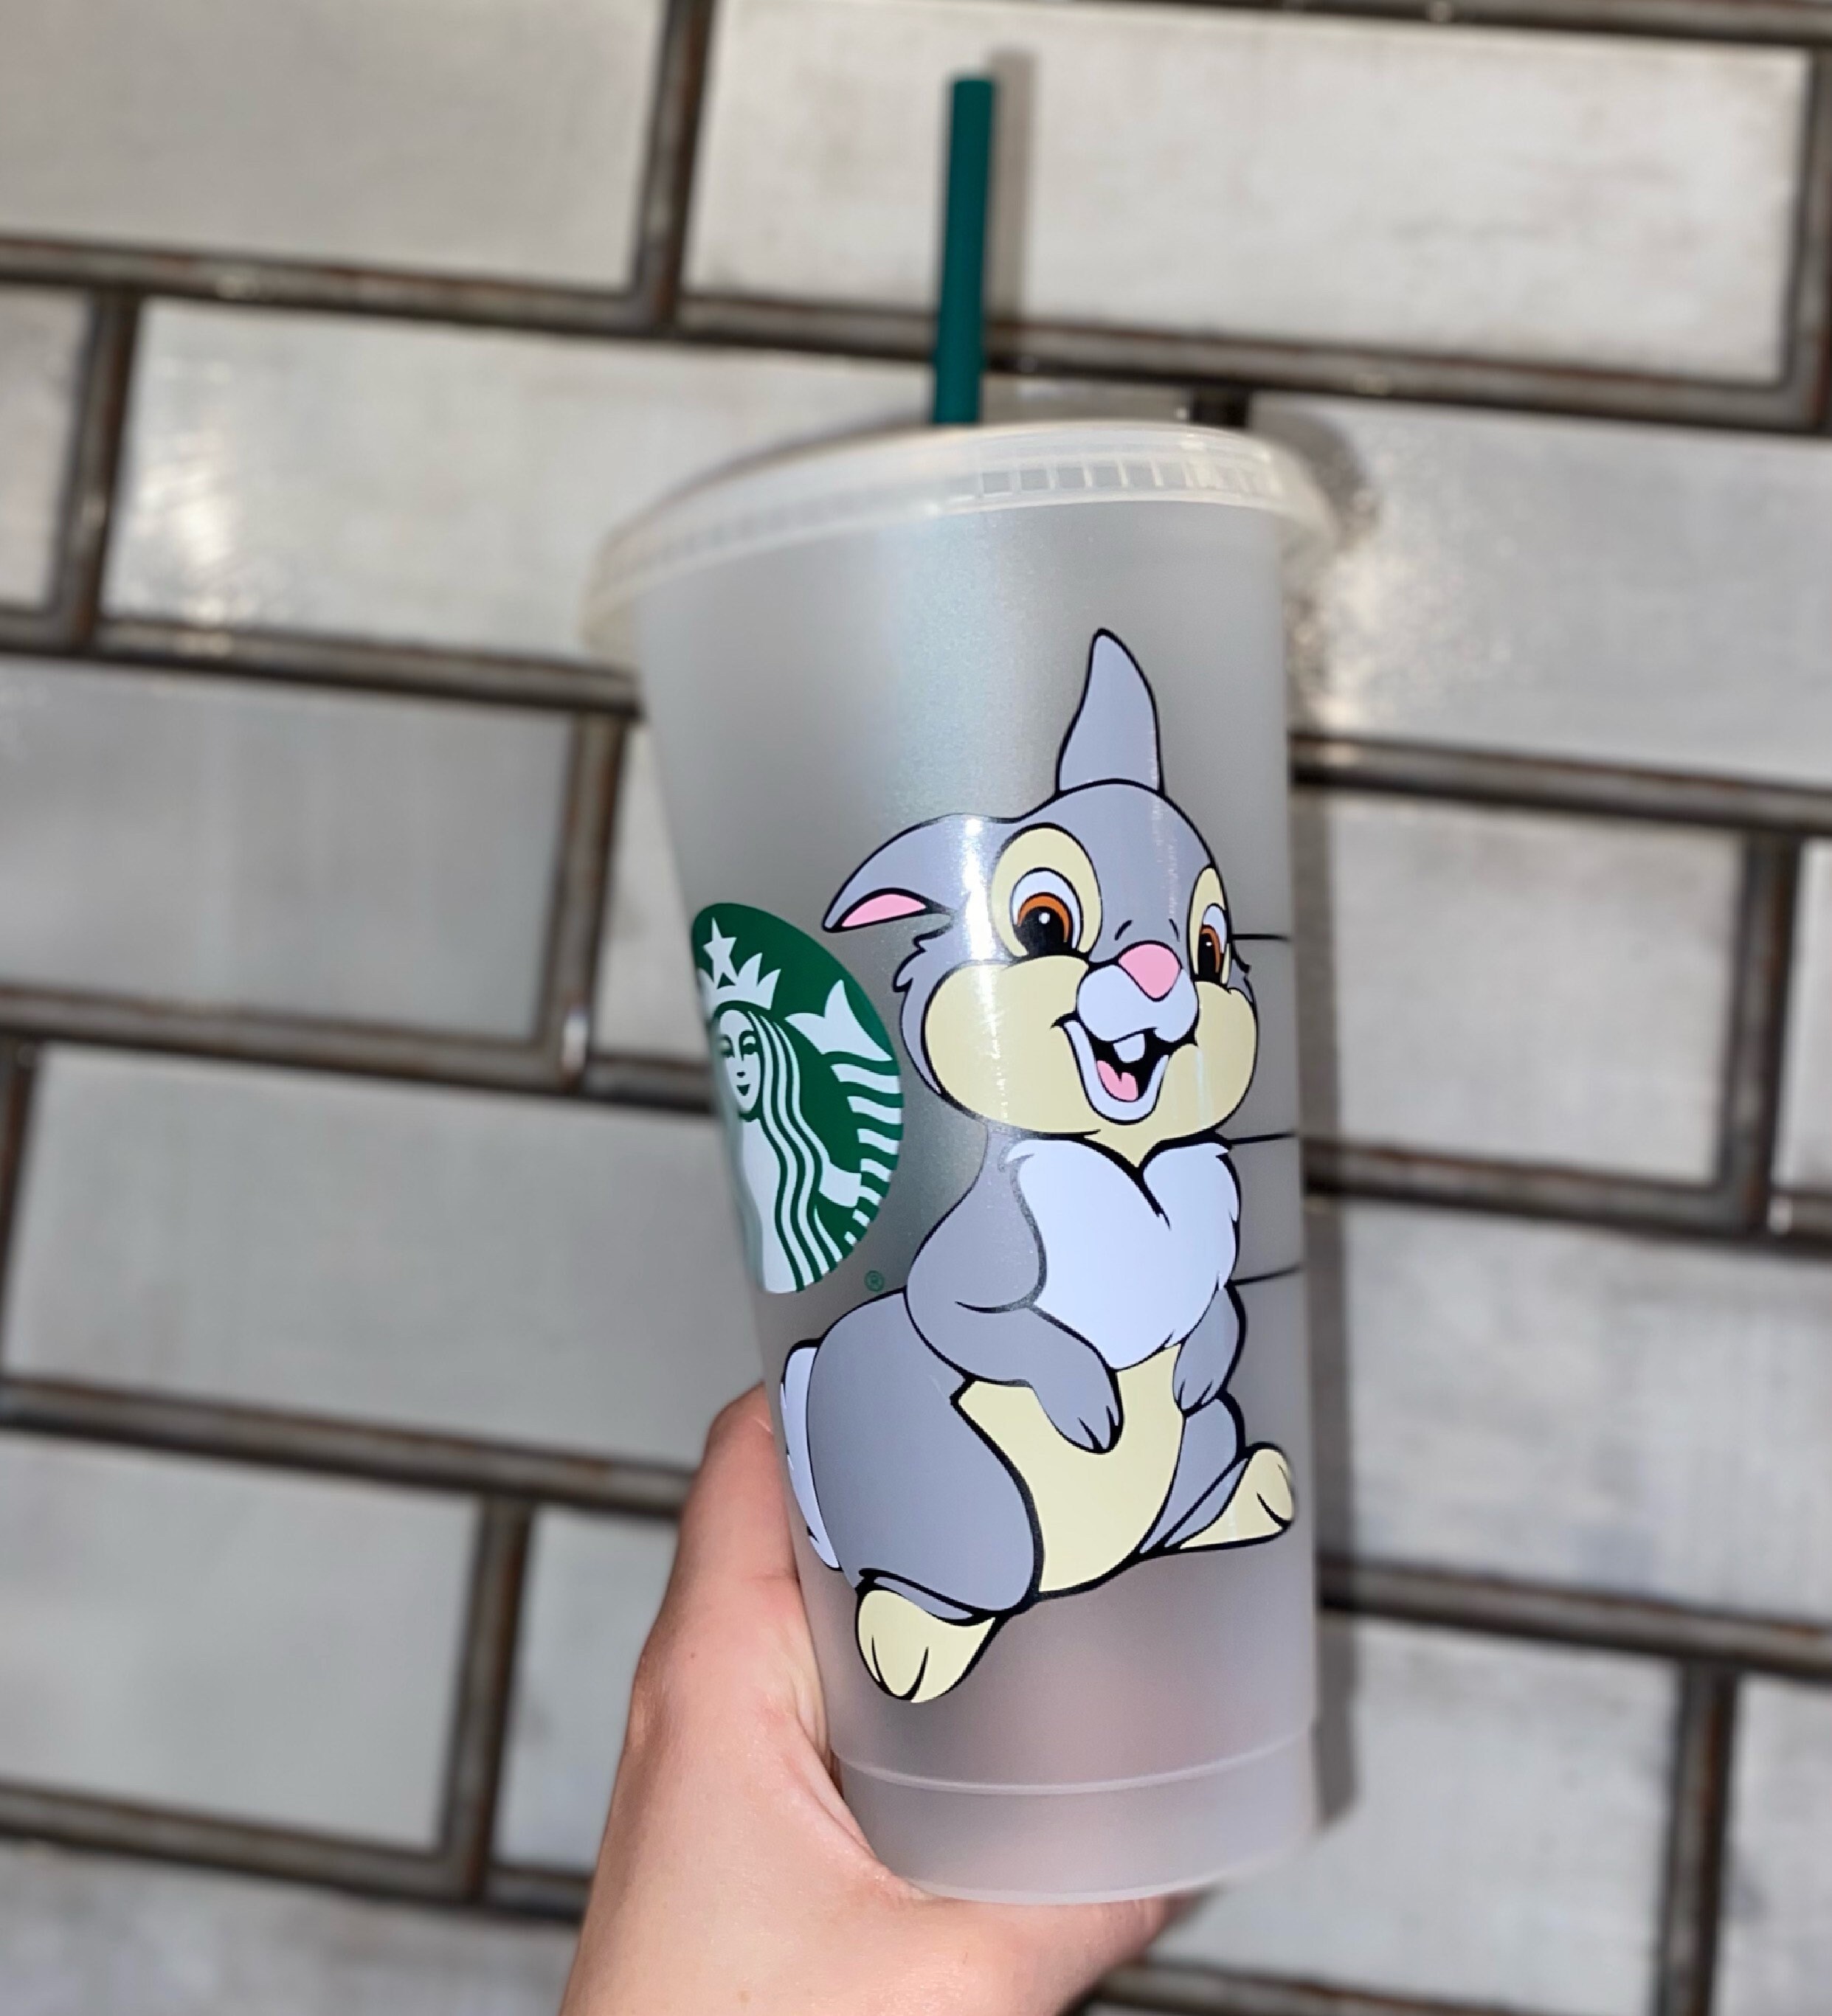 Bambi Cold Cup Starbucks Hot Cup Disney Water Bottle Thumper Hot Cup Disney Cup Thumper Cold Cup Thumper Water Bottle Bambi Bottle